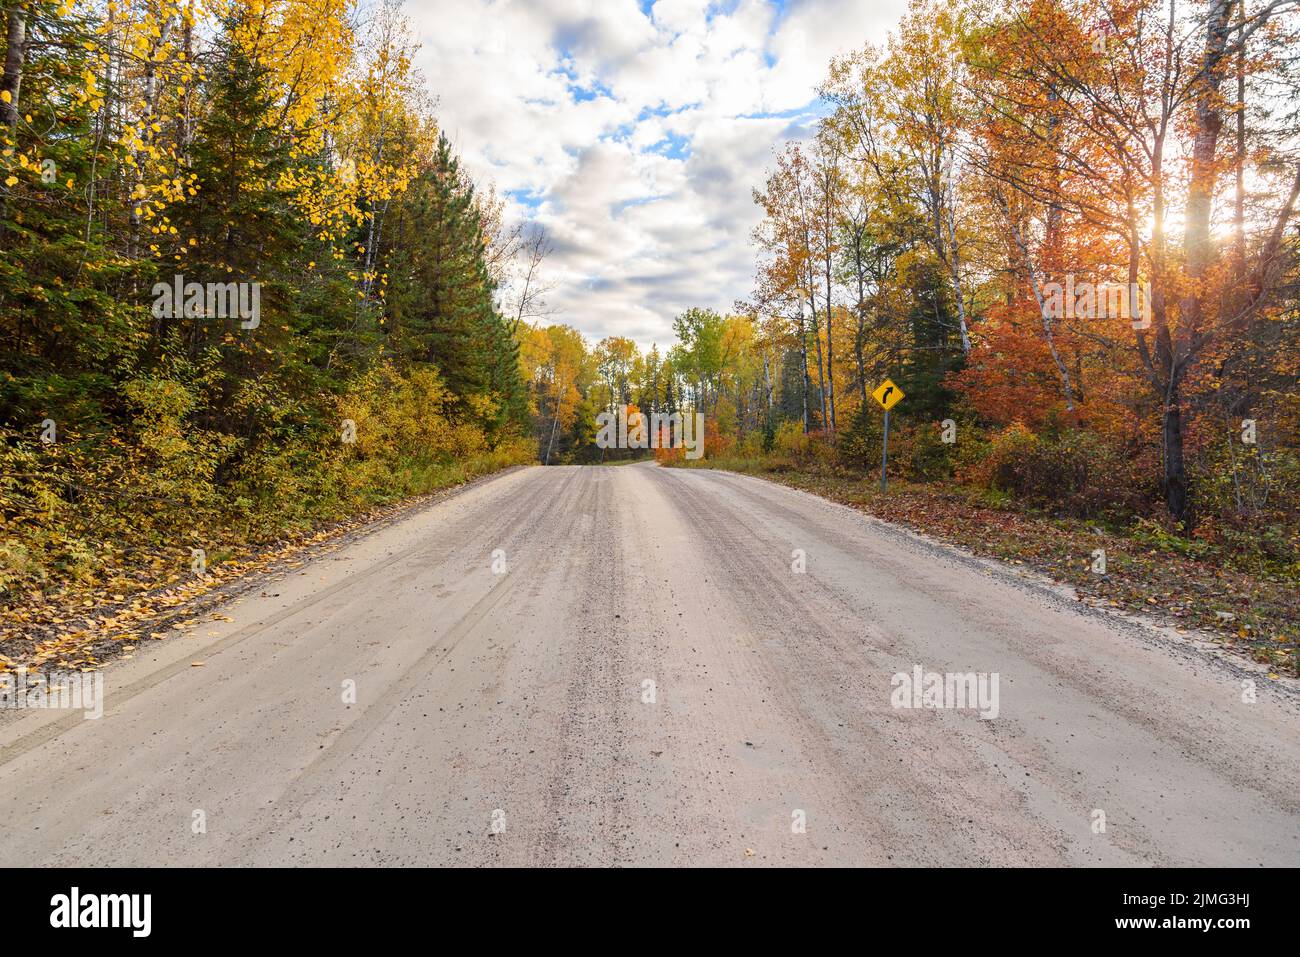 Empty unmade road through a colourful autumn forest at sunset Stock Photo